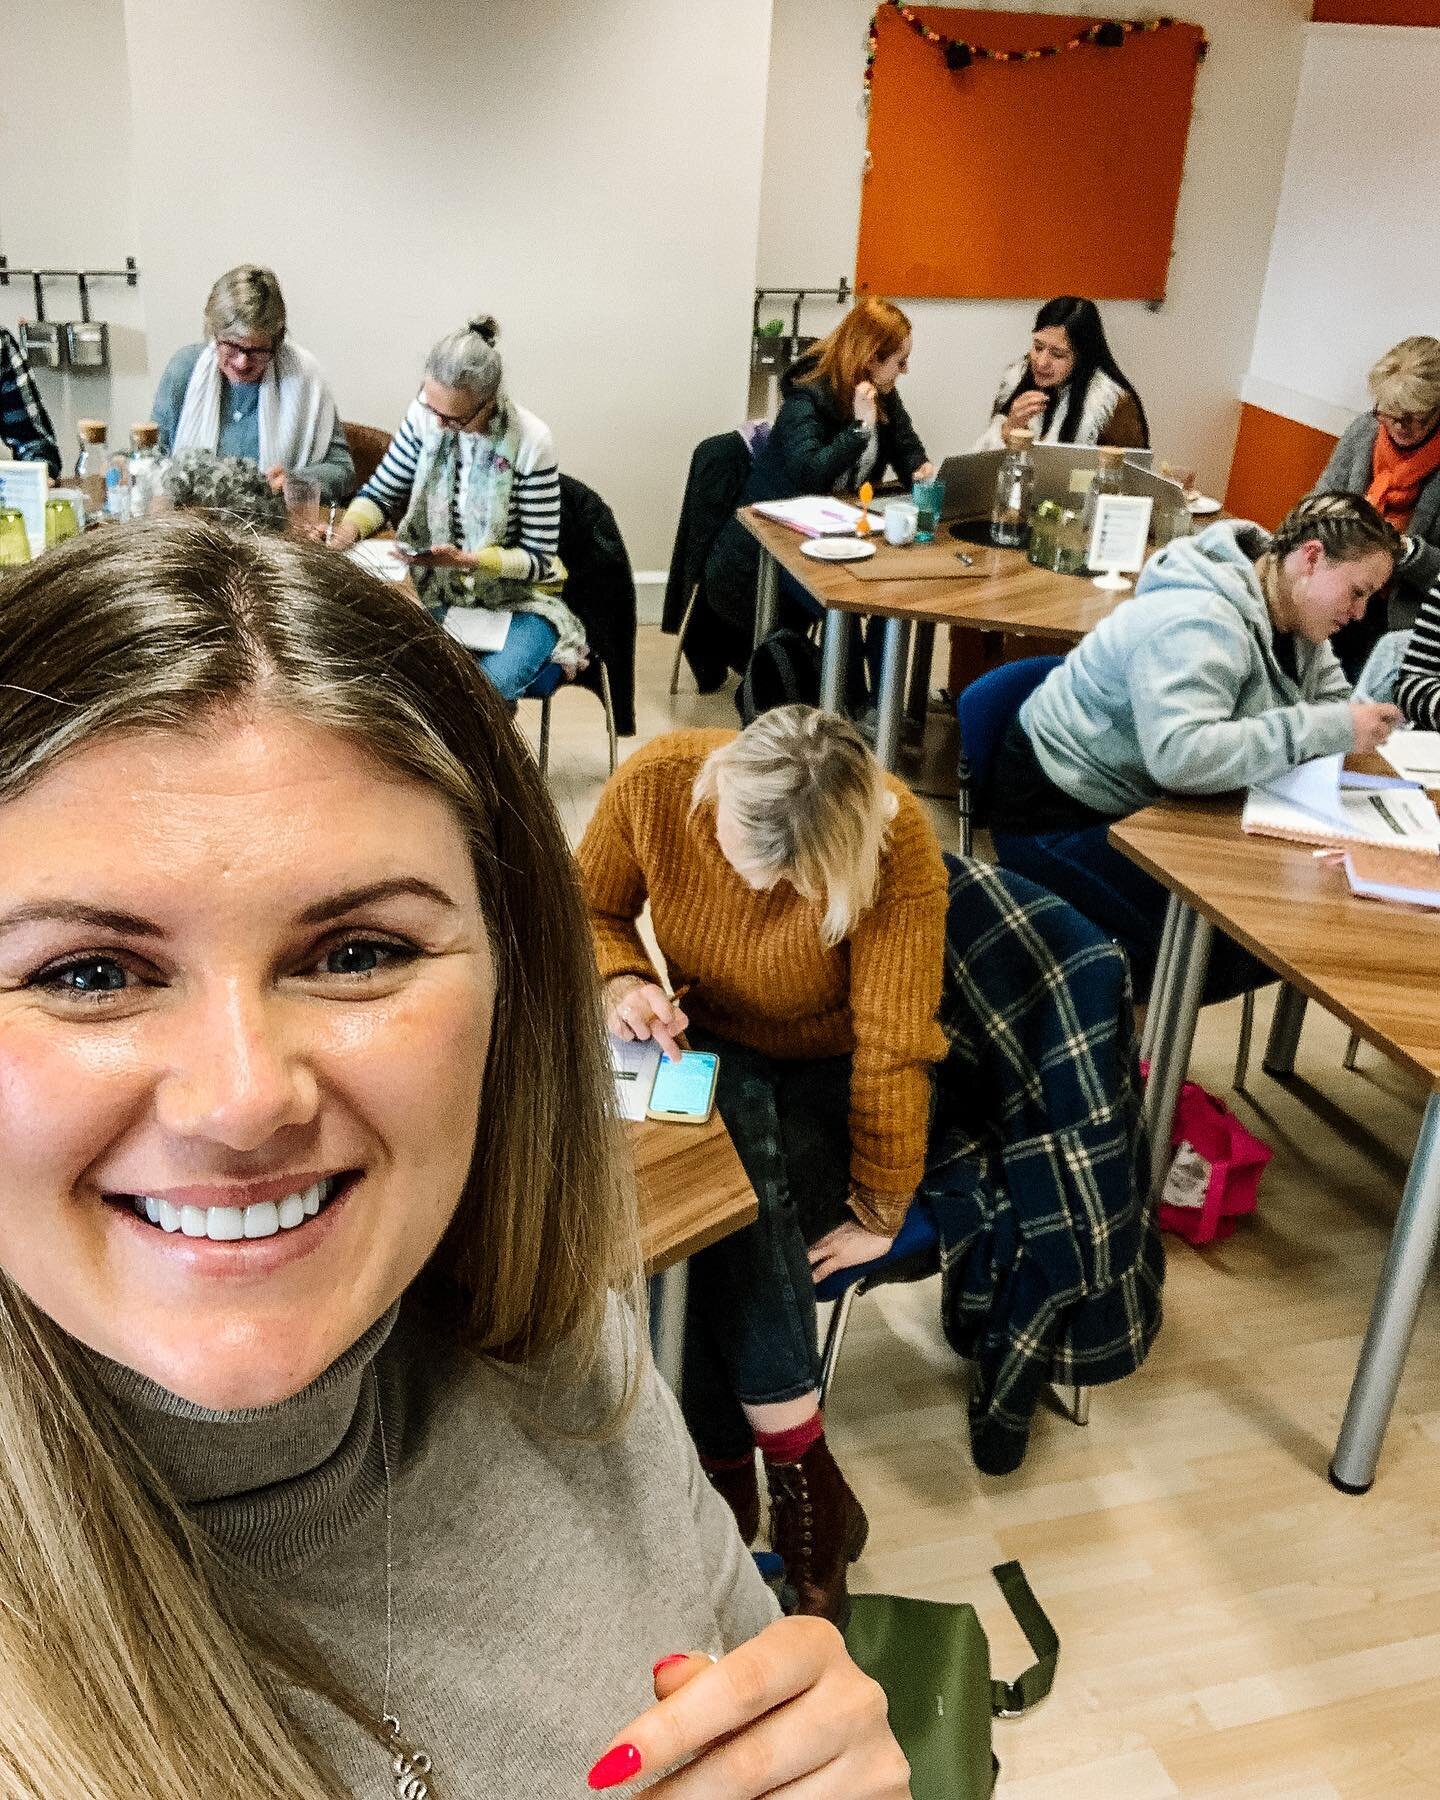 Had such a fun day delivering Interactive Content Creation workshop for @foodclustereast members at @no8thorperoad ! 

We had a full house with 15 business owners in the room who worked hard, and at the end of the day walked away equipped with some g